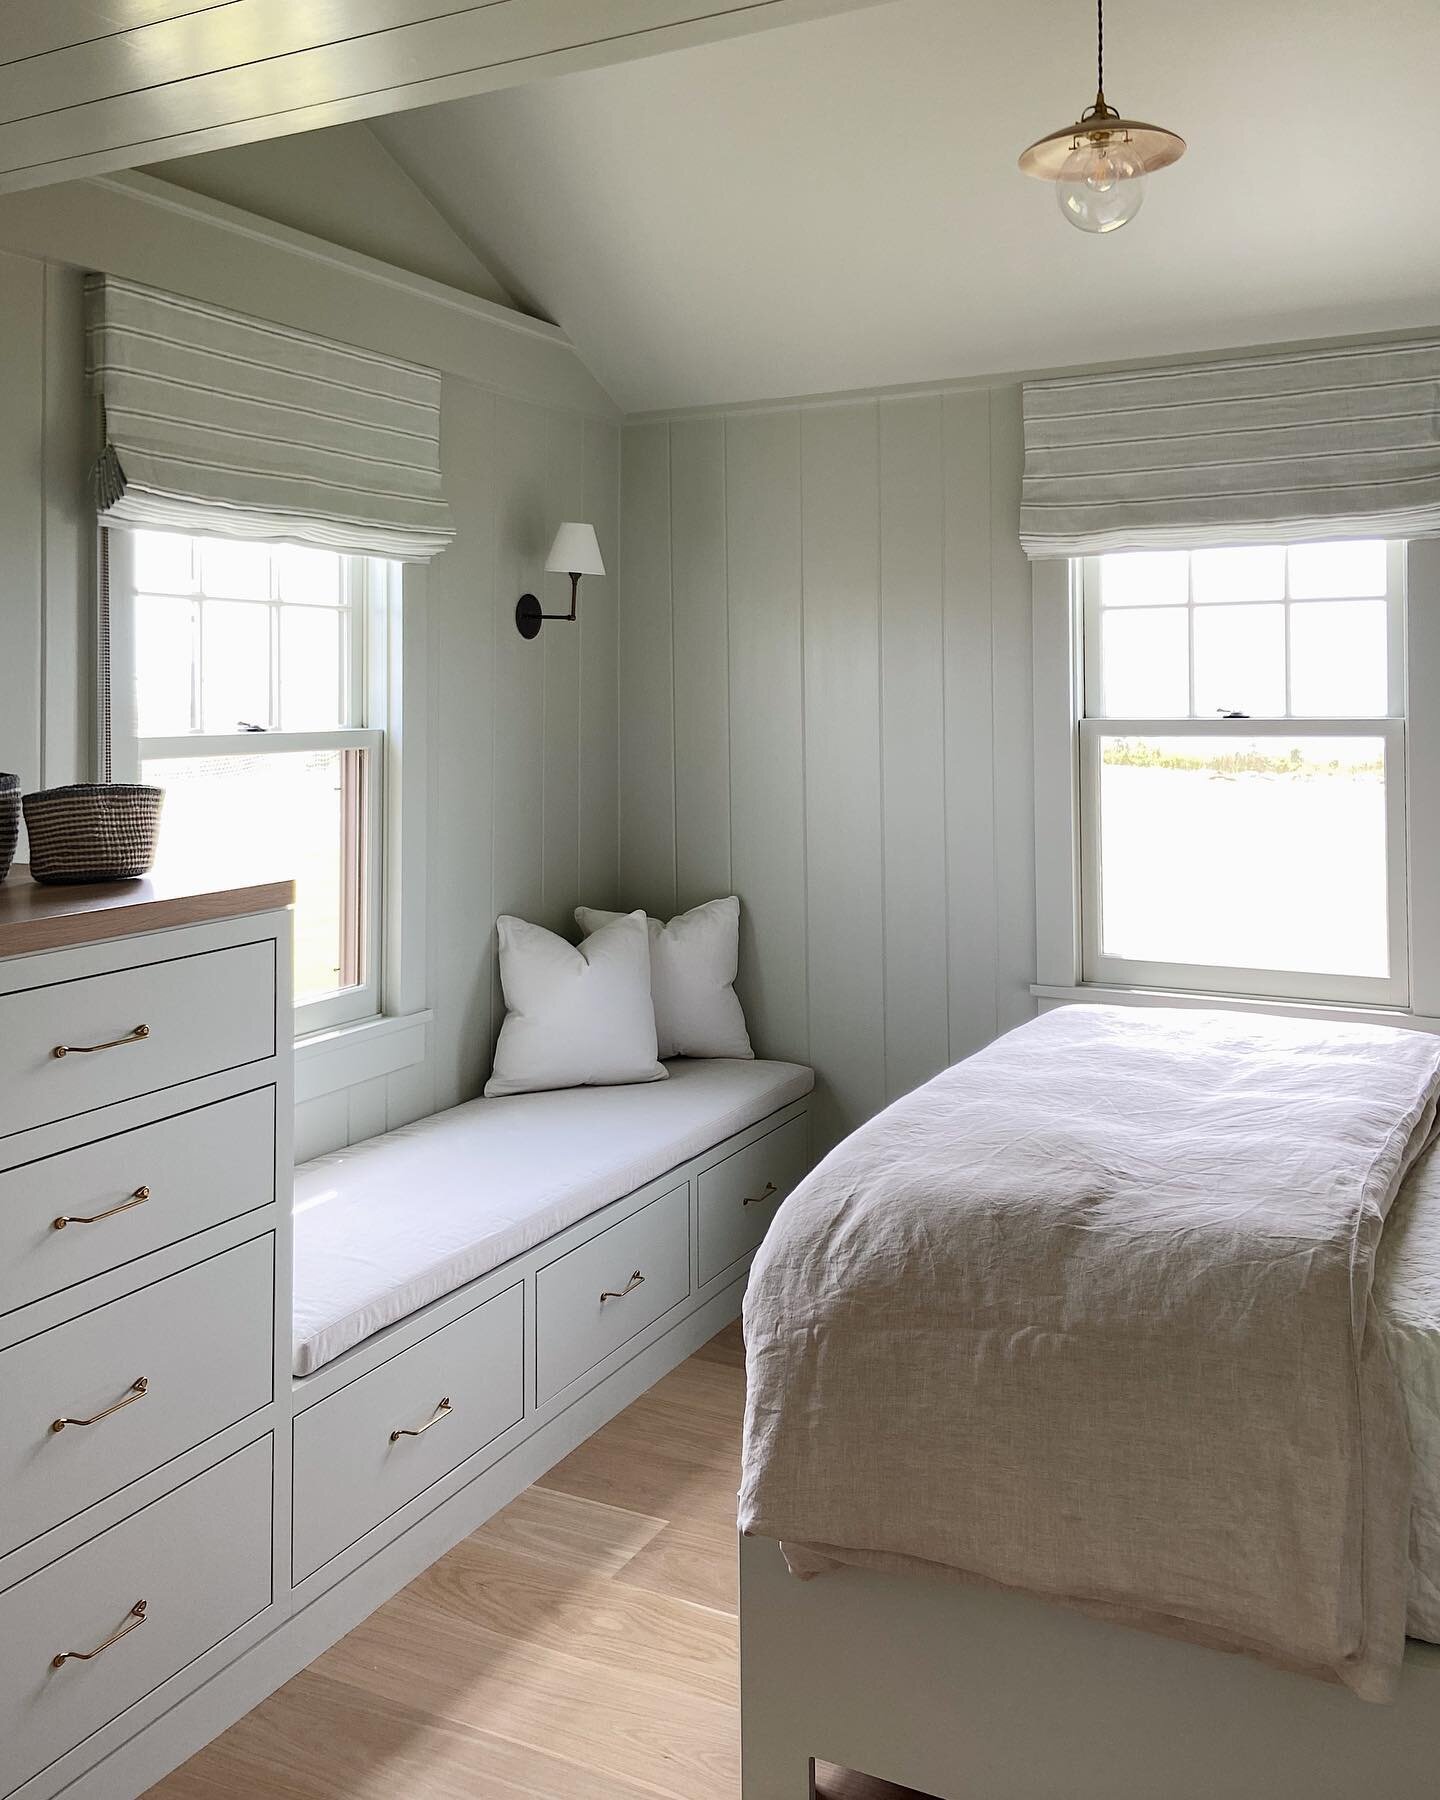 A little slice of Nantucket heaven we&rsquo;ve been installing over the past few weeks, working on for the past TWO years. Do you think the client would mind if I sneak in a little 😴 in the Guest Cottage?